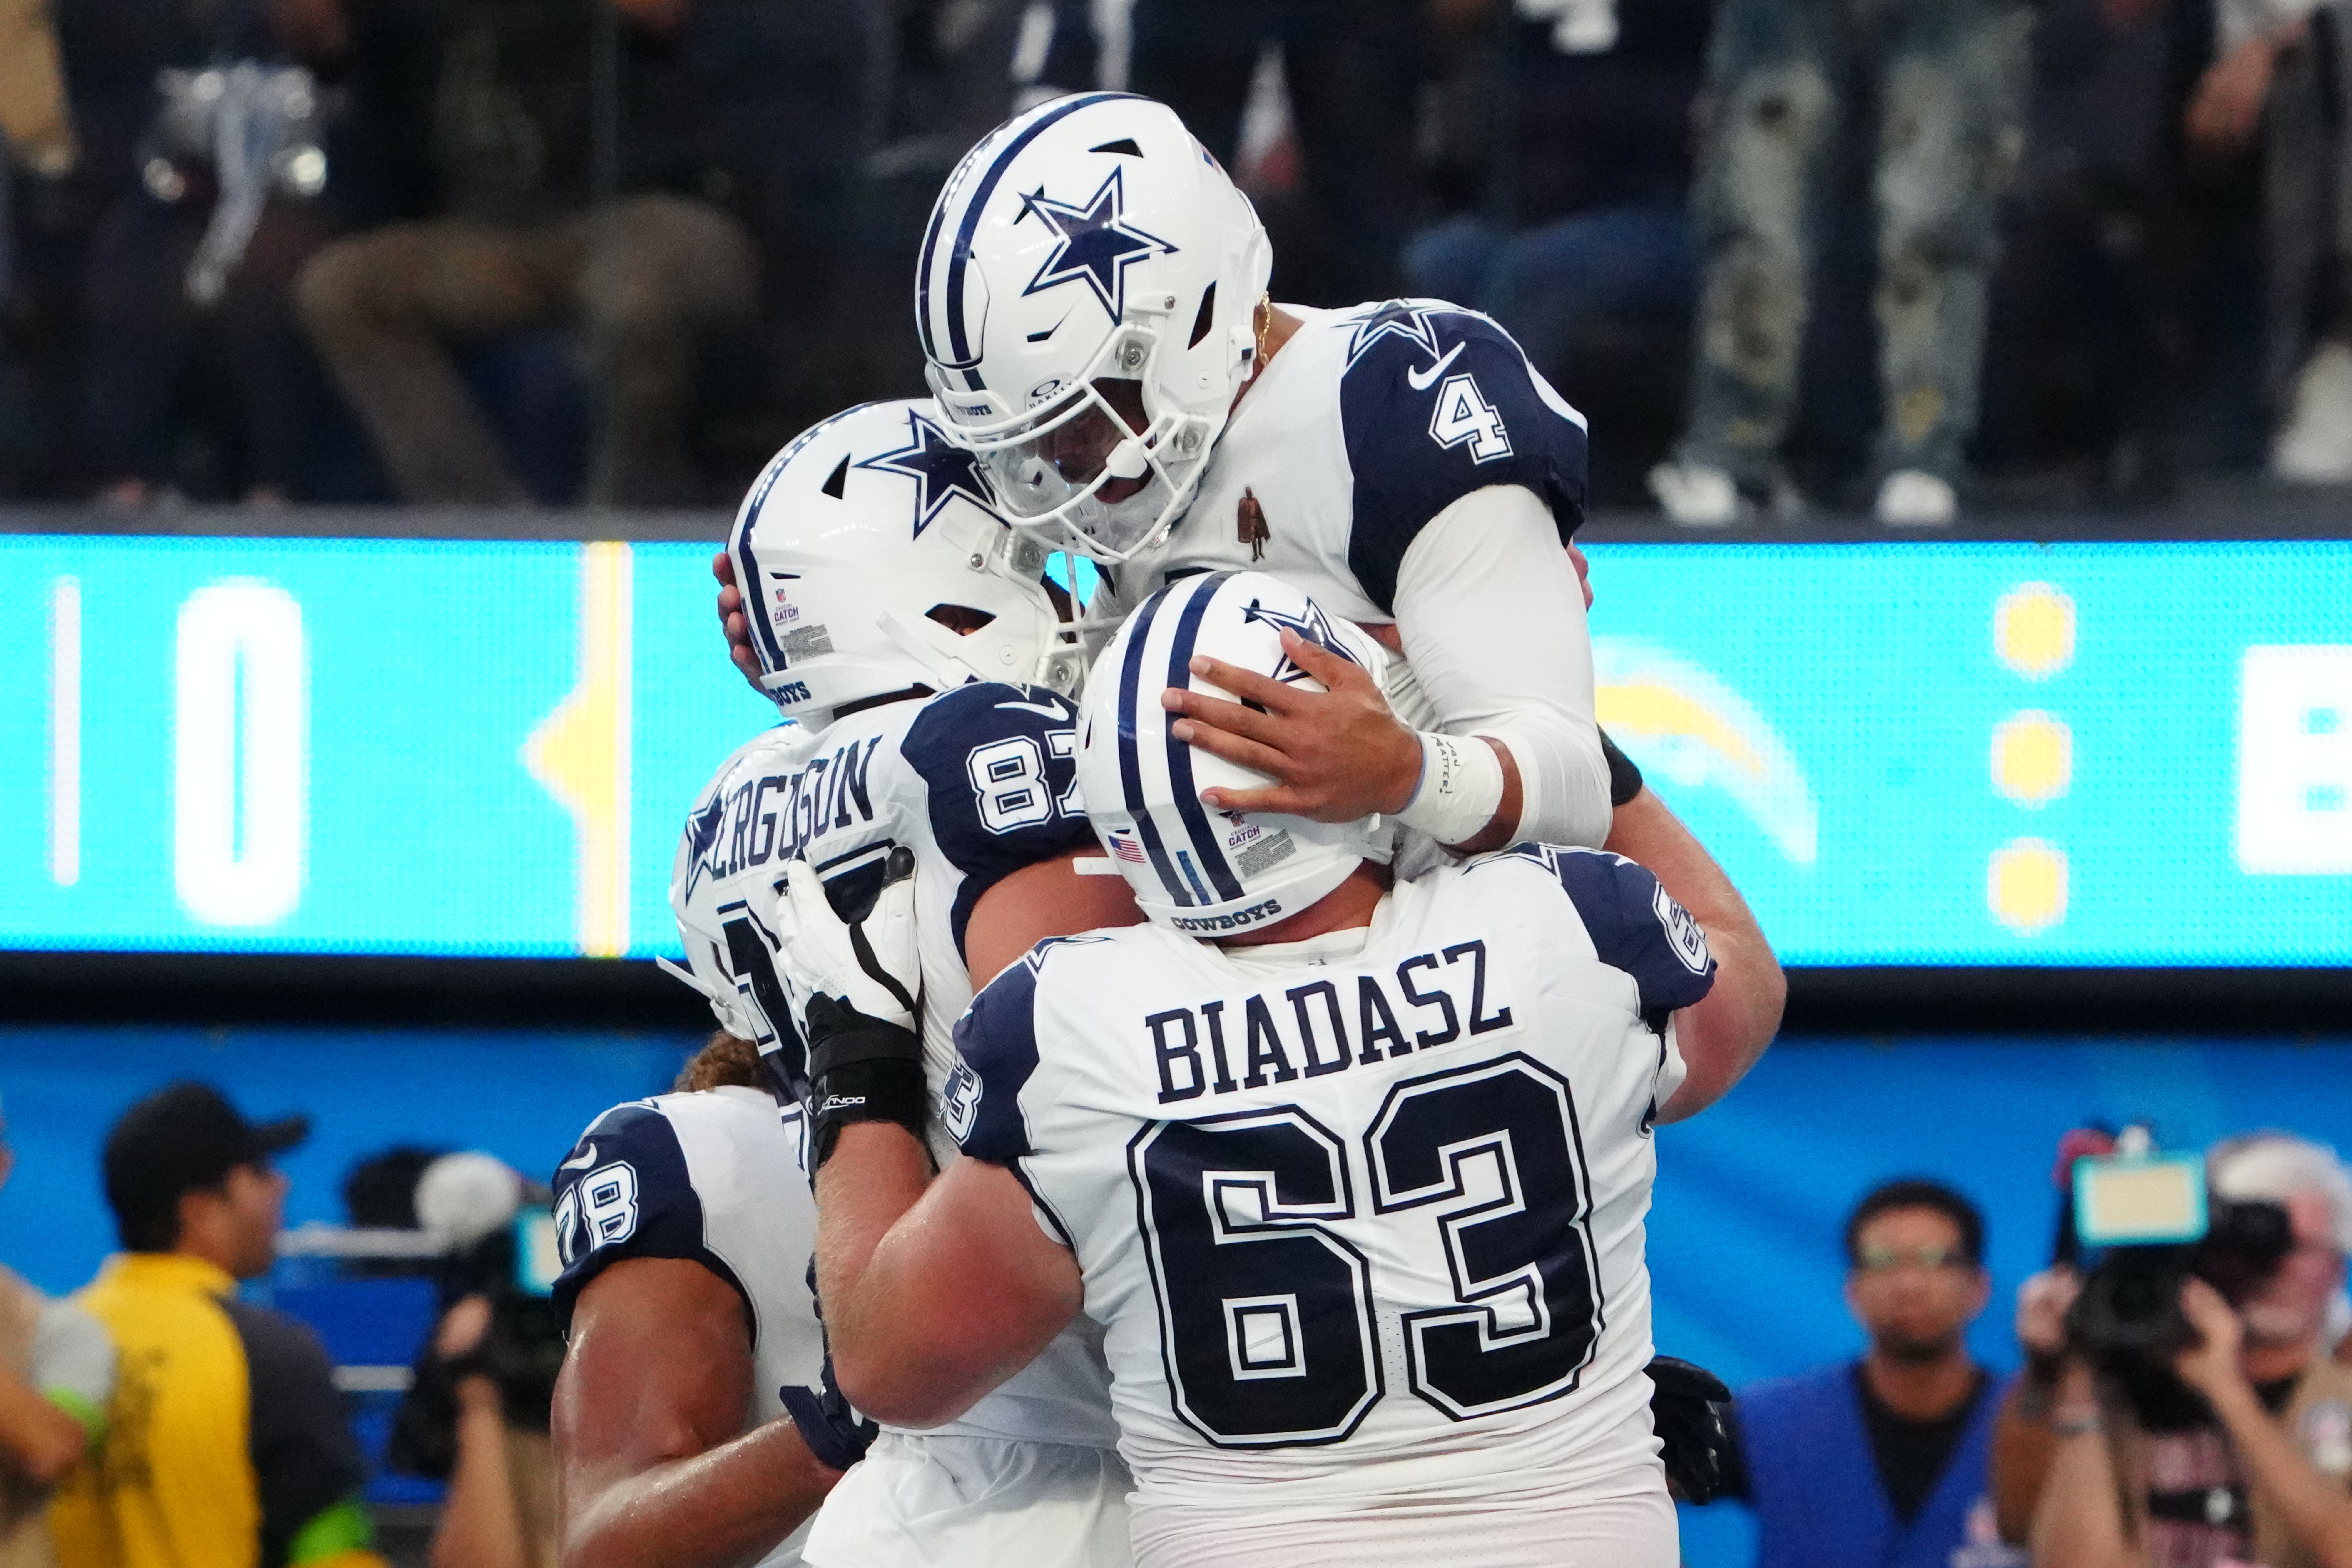 Cowboys sideline exclusive: What sparked pregame skirmish between Dallas, LA  Chargers?